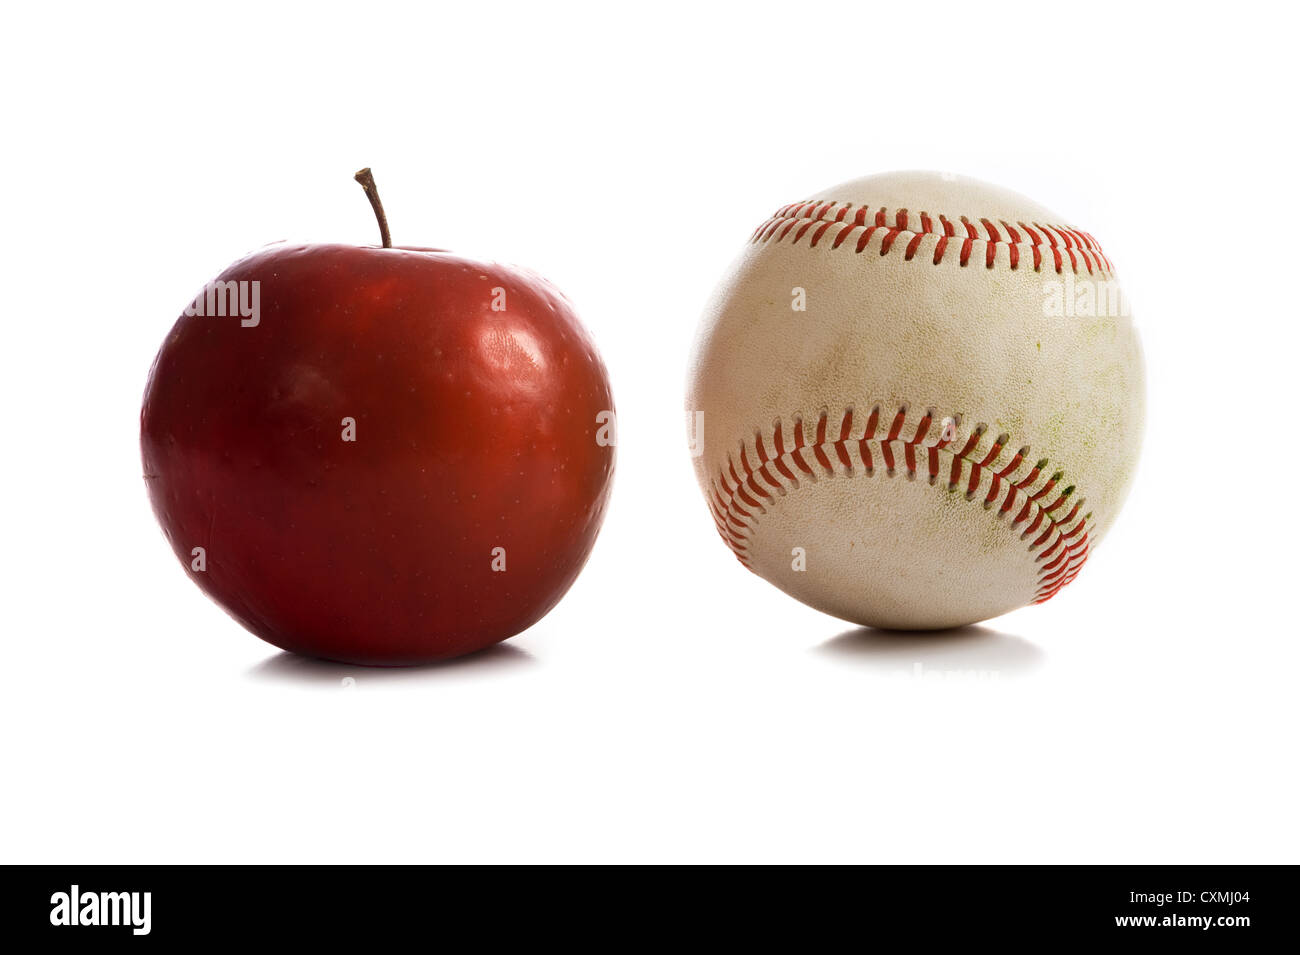 A red Rome apple and a baseball on a white background, symbols of the American summertime, with copy space Stock Photo